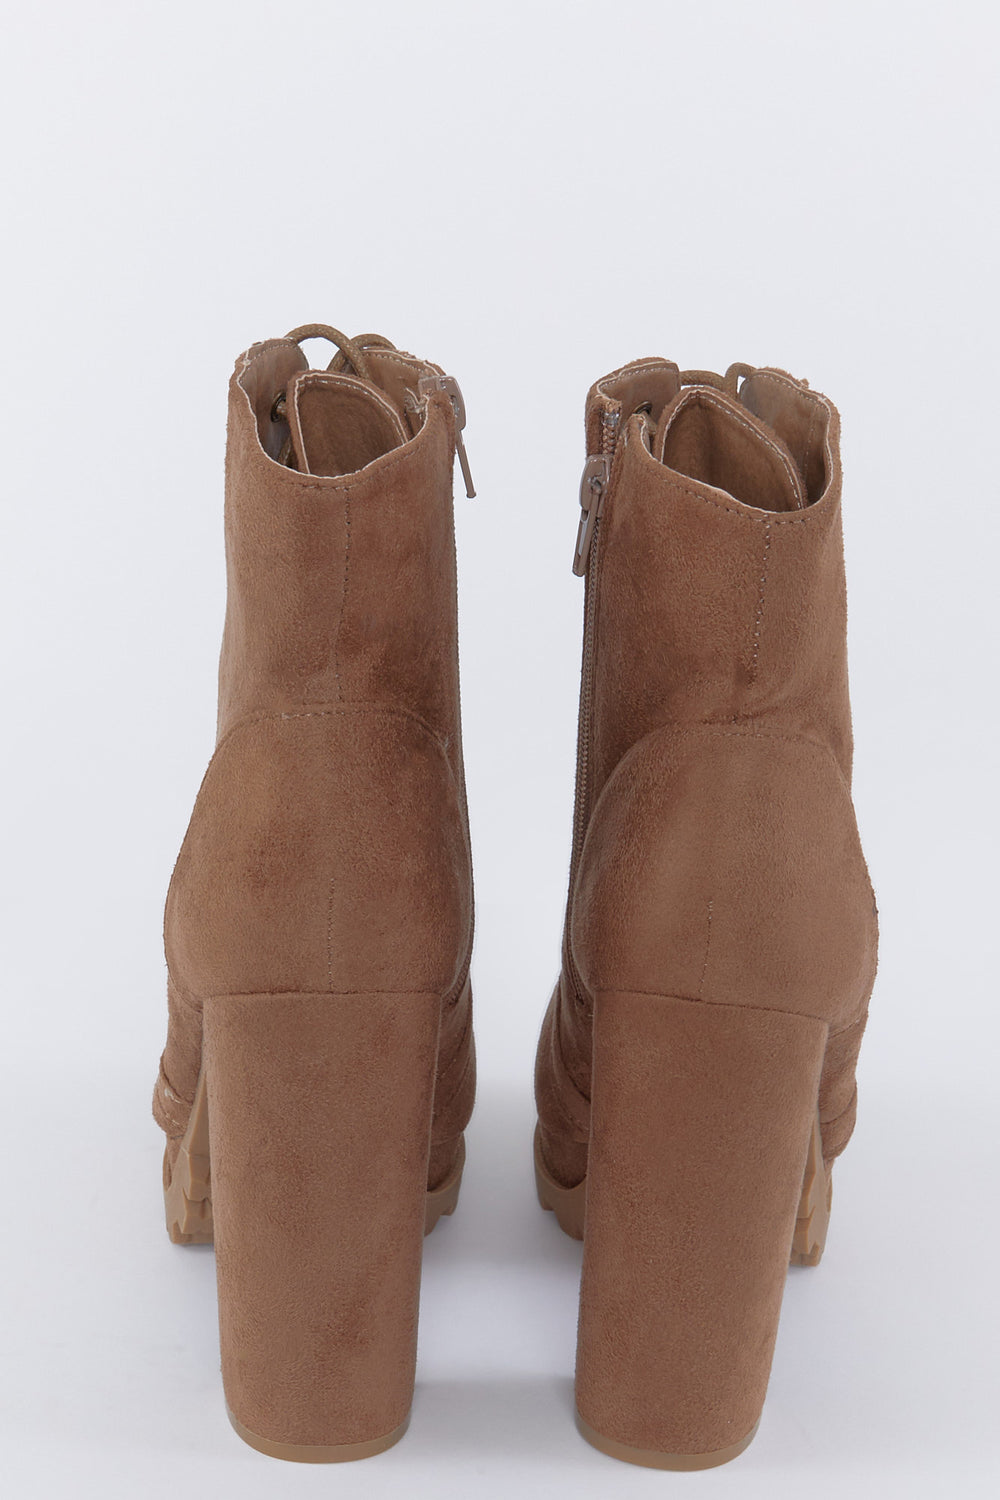 Faux-Suede Lace-Up Lug Sole Block Heel Boot Brown